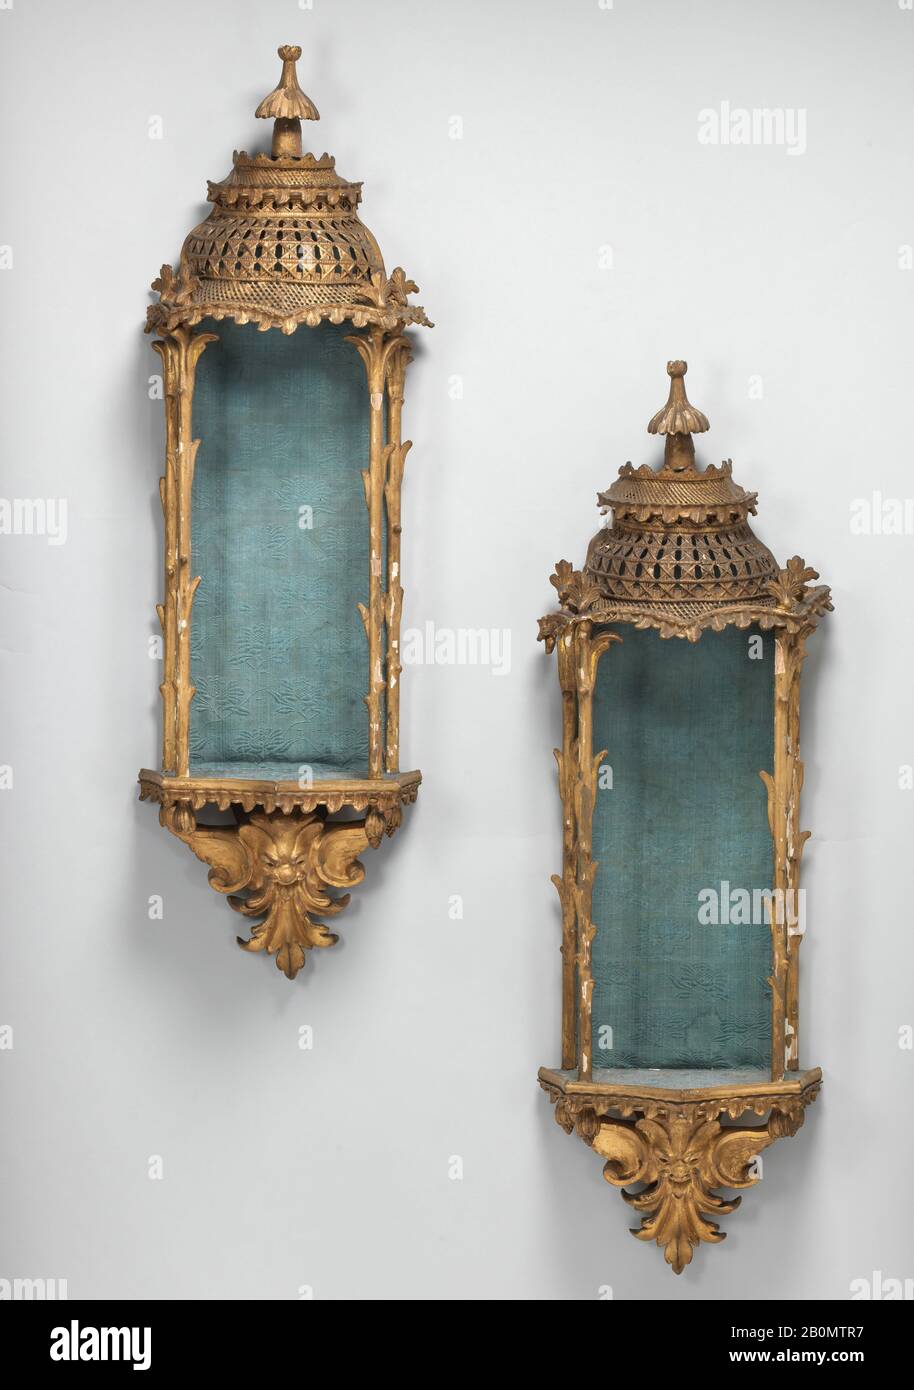 Pair of hanging niches, British, ca. 1750–55, British, Carved and gilded wood, composition, and caning, Overall (each): 38 × 11 × 7 1/8 in. (96.5 × 27.9 × 18.1 cm), Woodwork-Furniture Stock Photo